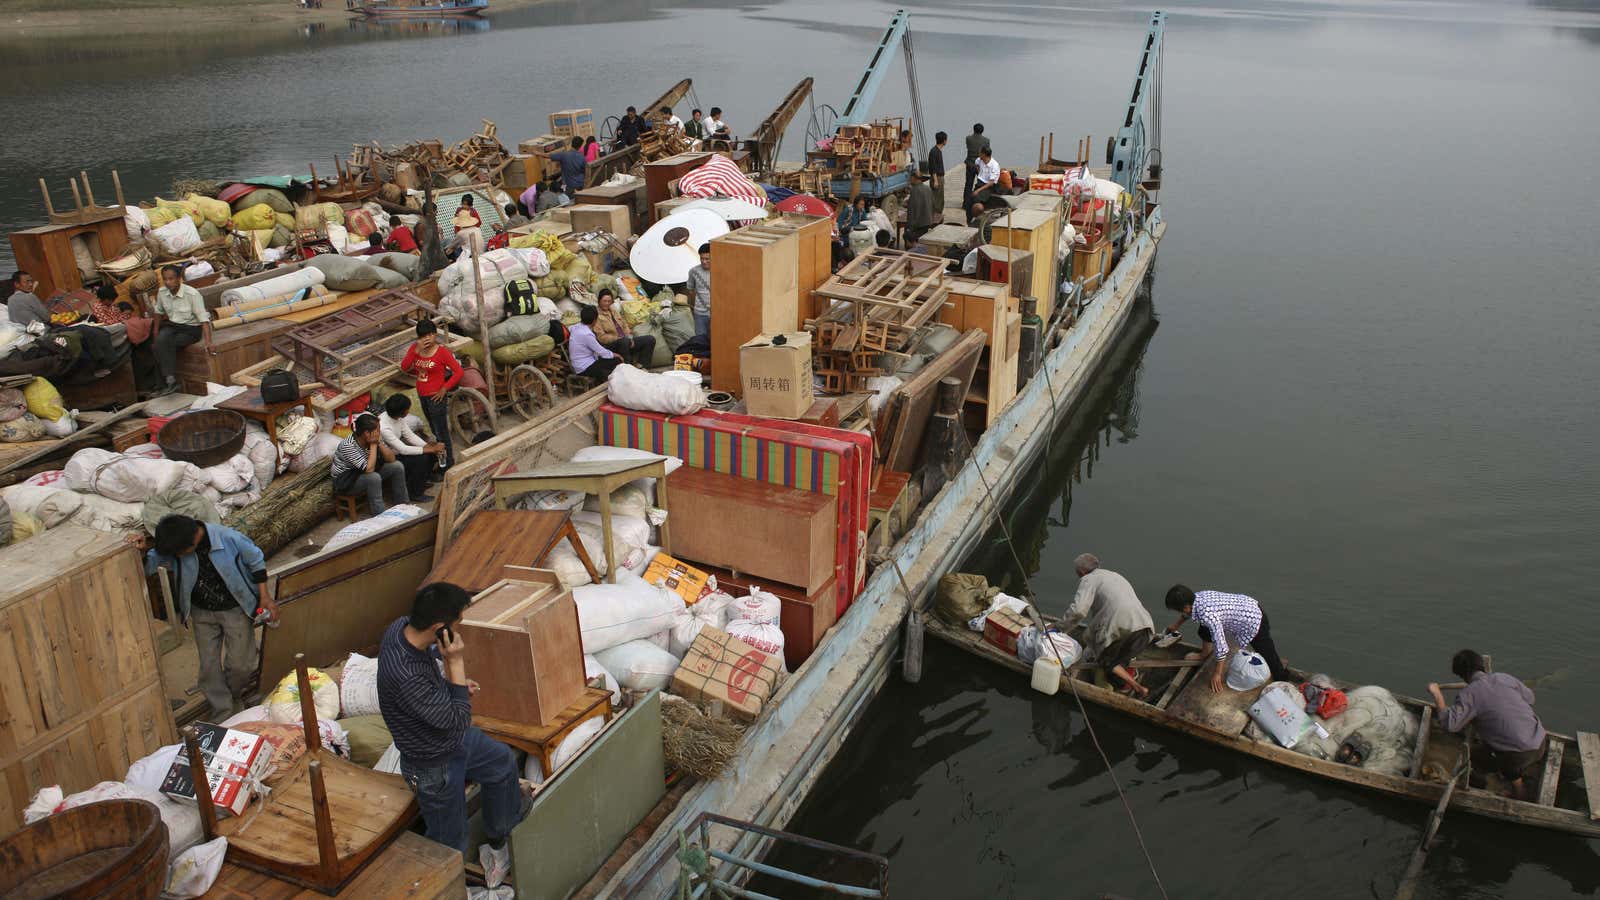 Villagers in Danjiangkou prepare to move their belongings in 2009, ahead of the resettlement process.